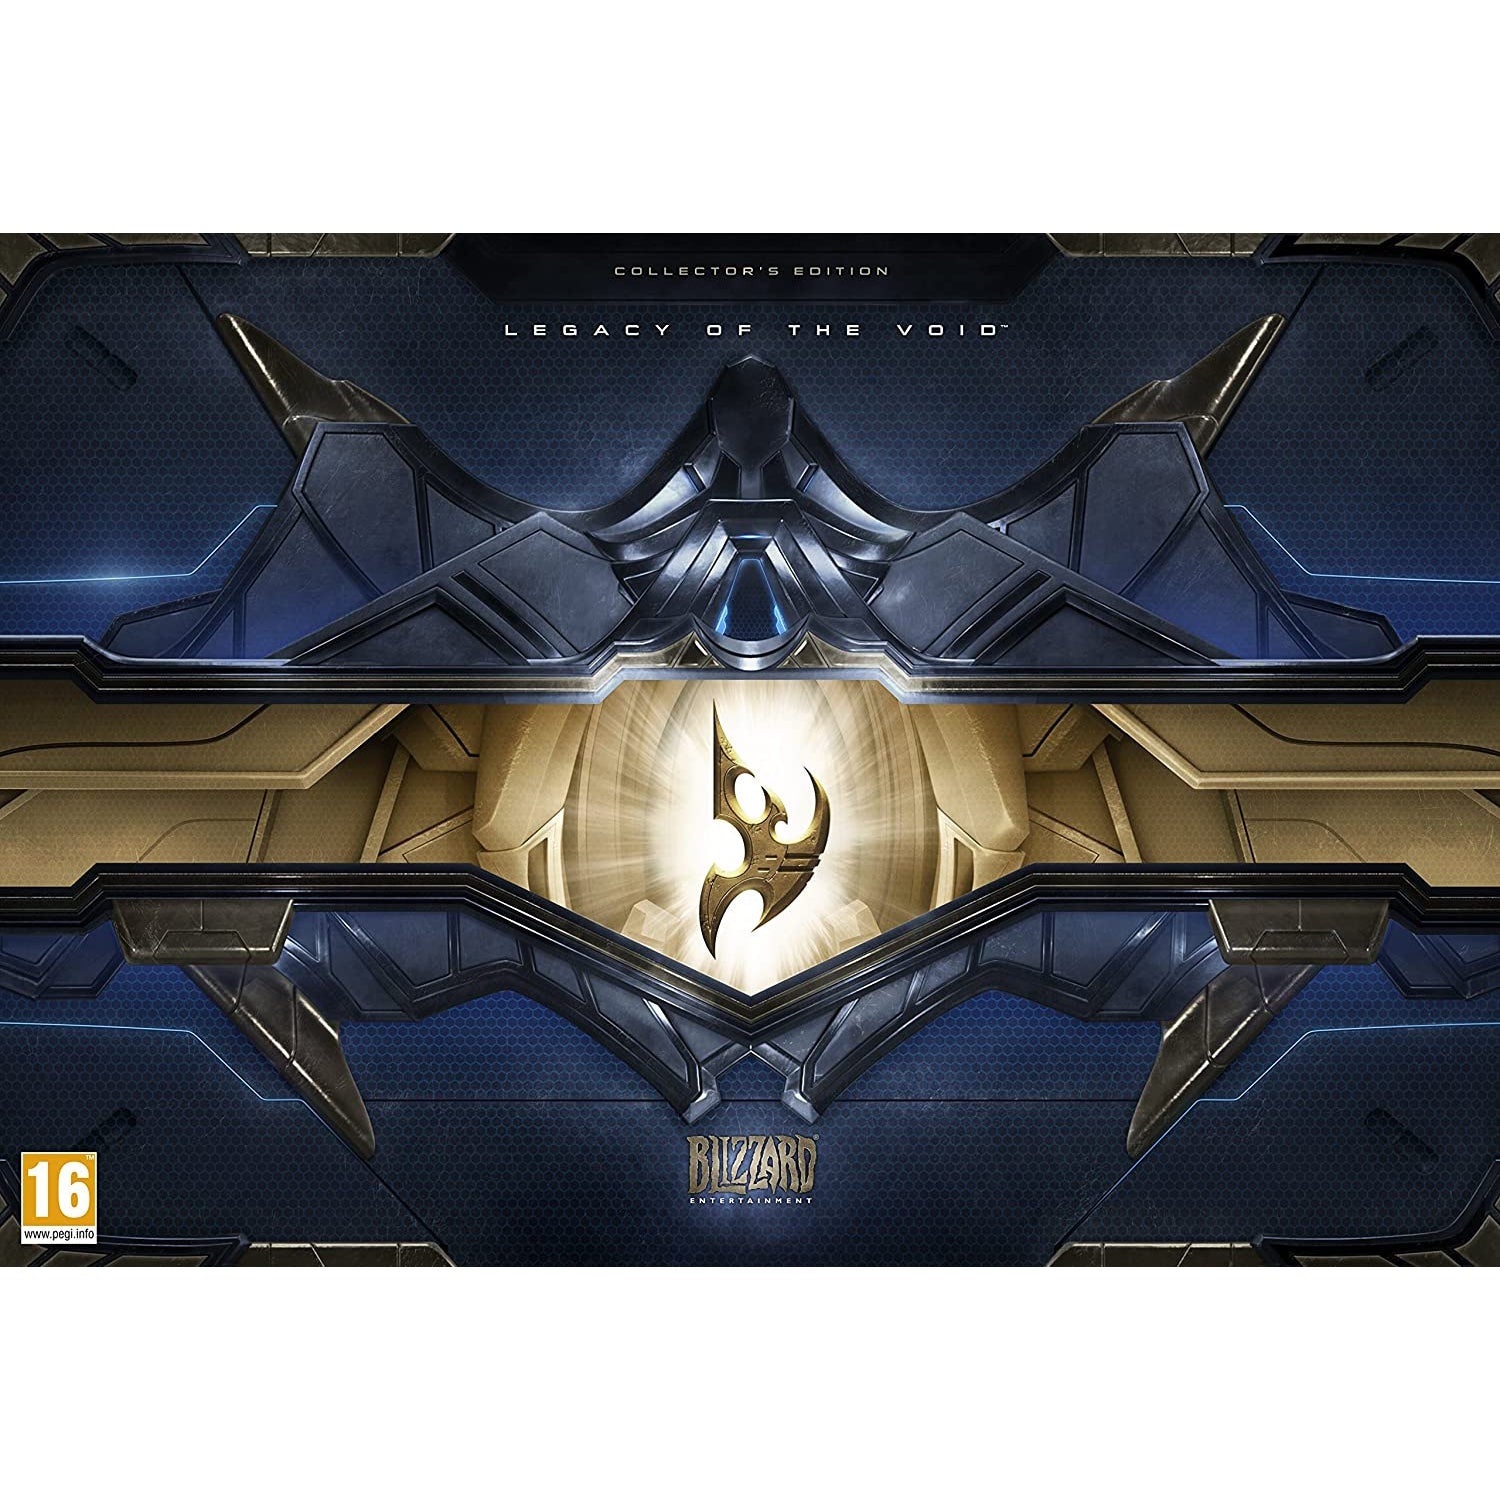 Starcraft 2 - Legacy Of The Void Collector's Edition